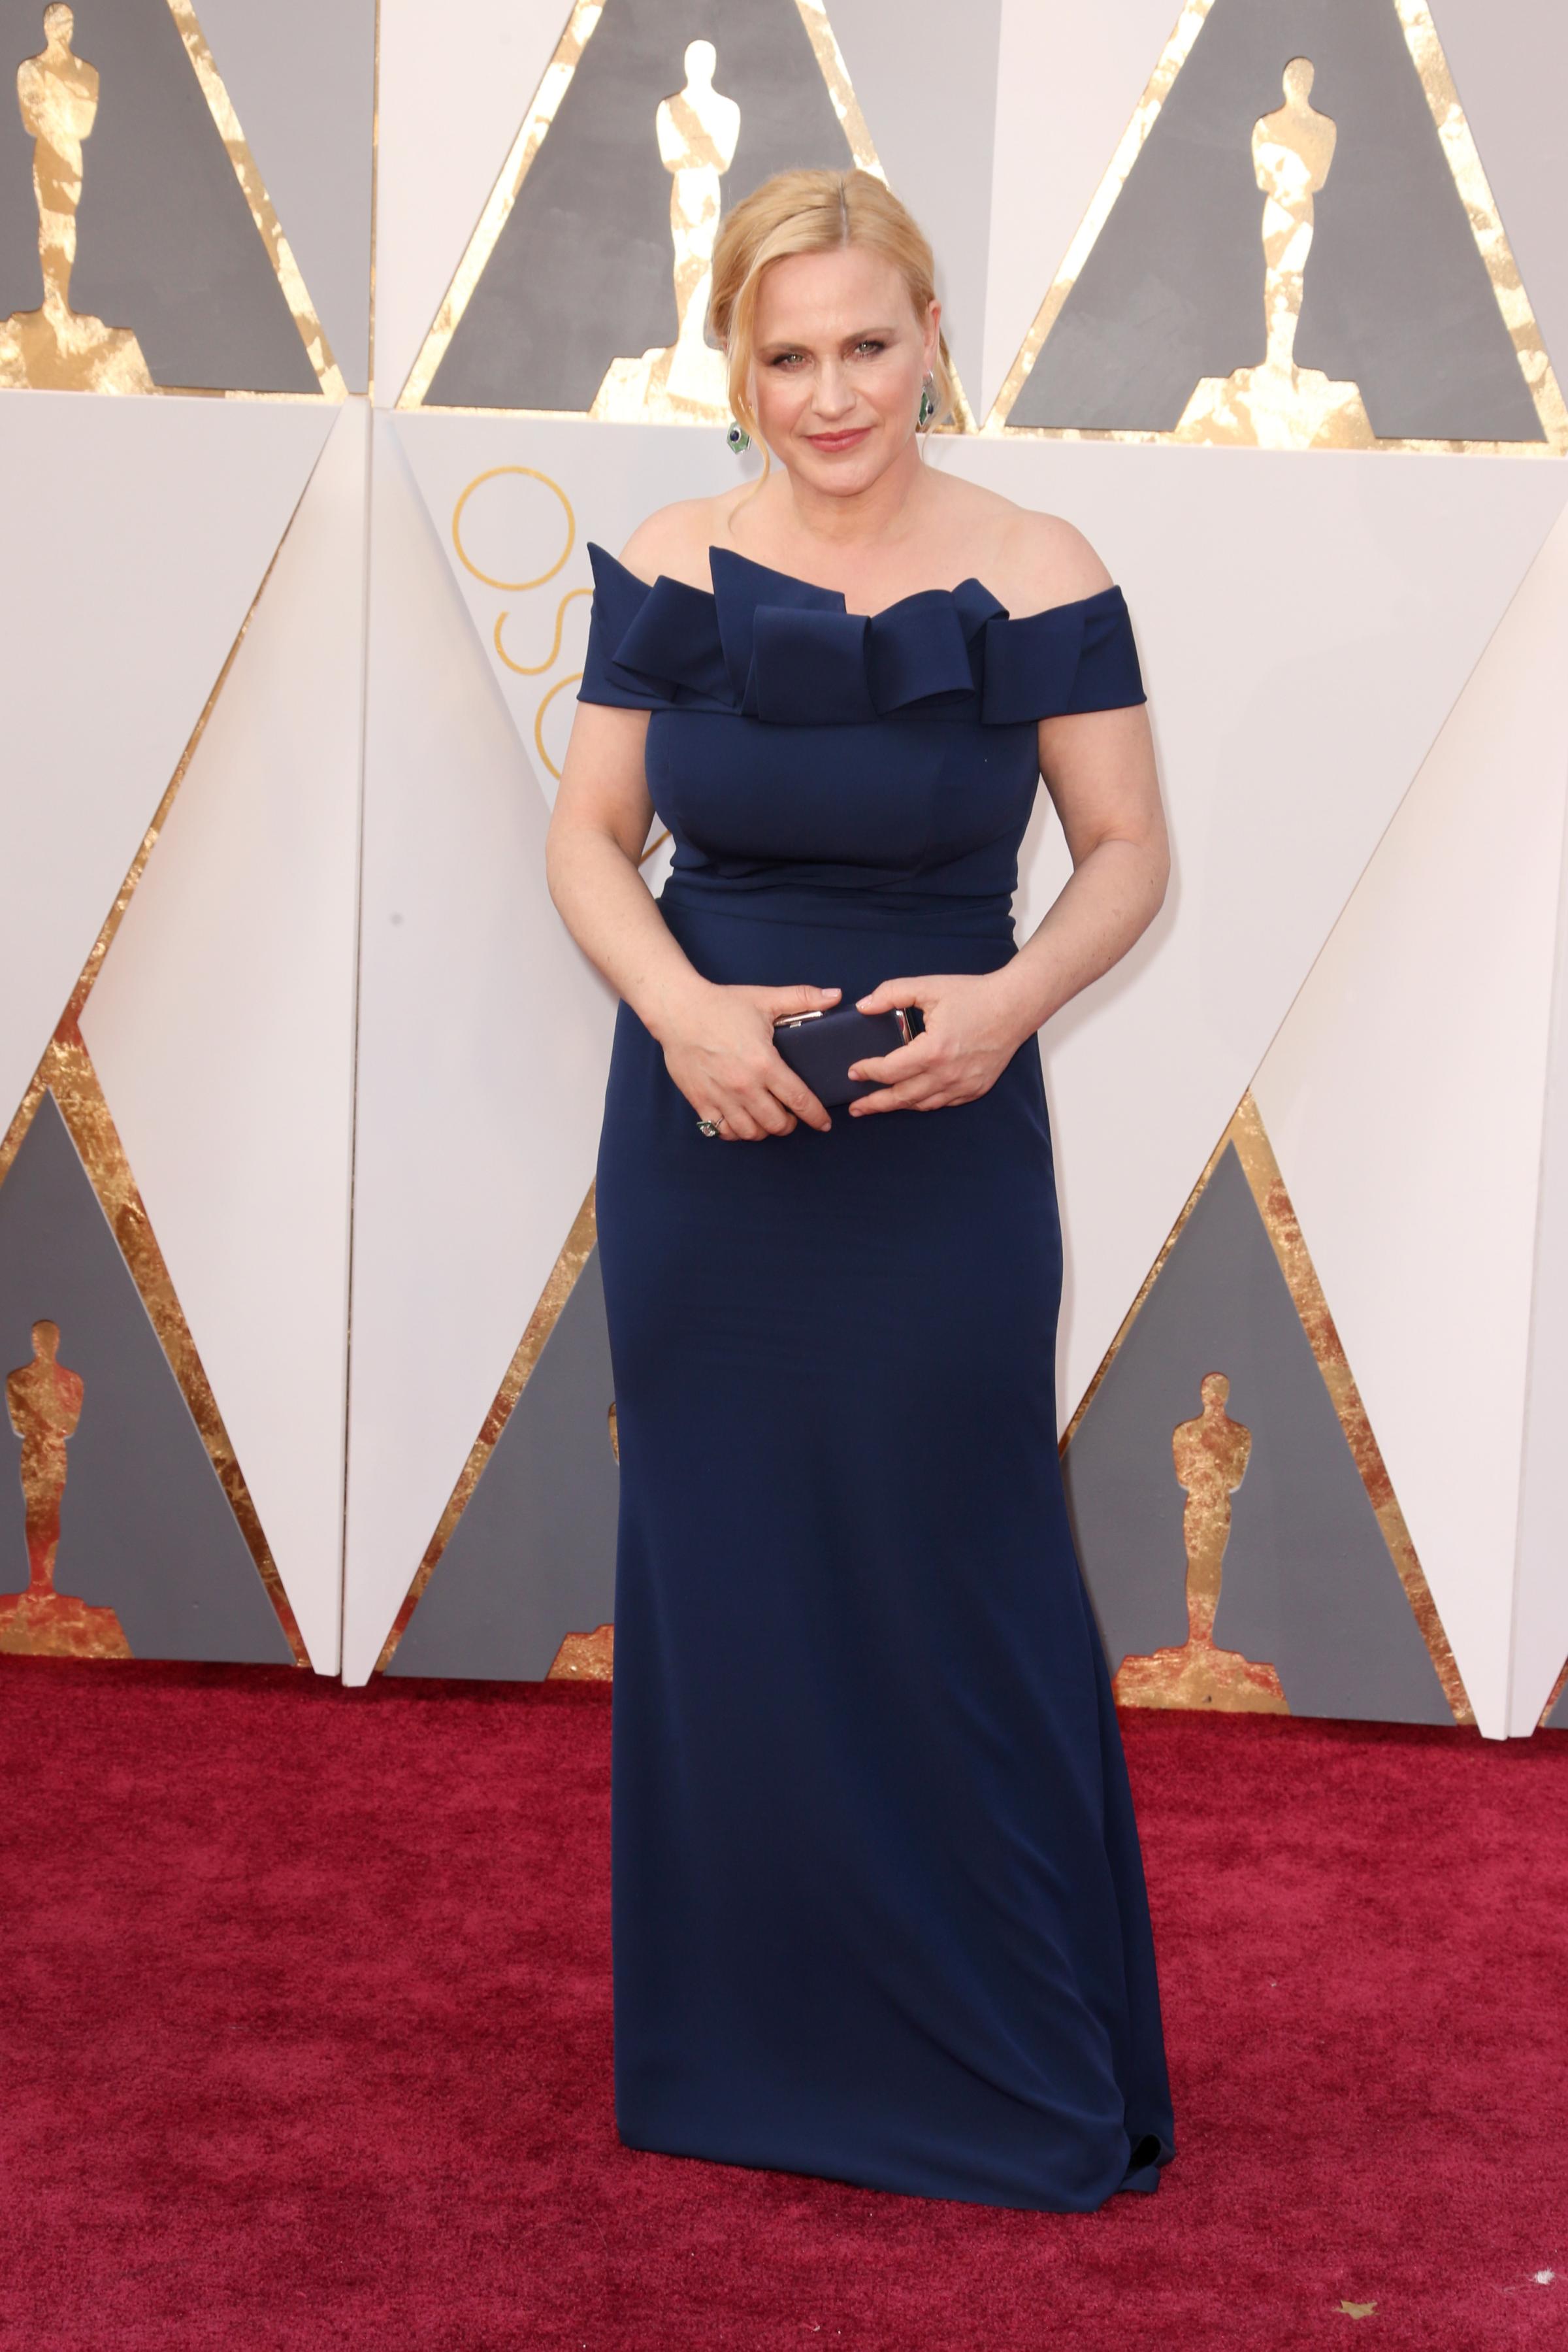 Patricia Arquette attends the 88th Annual Academy Awards on Feb. 28, 2016 in Hollywood, Calif.